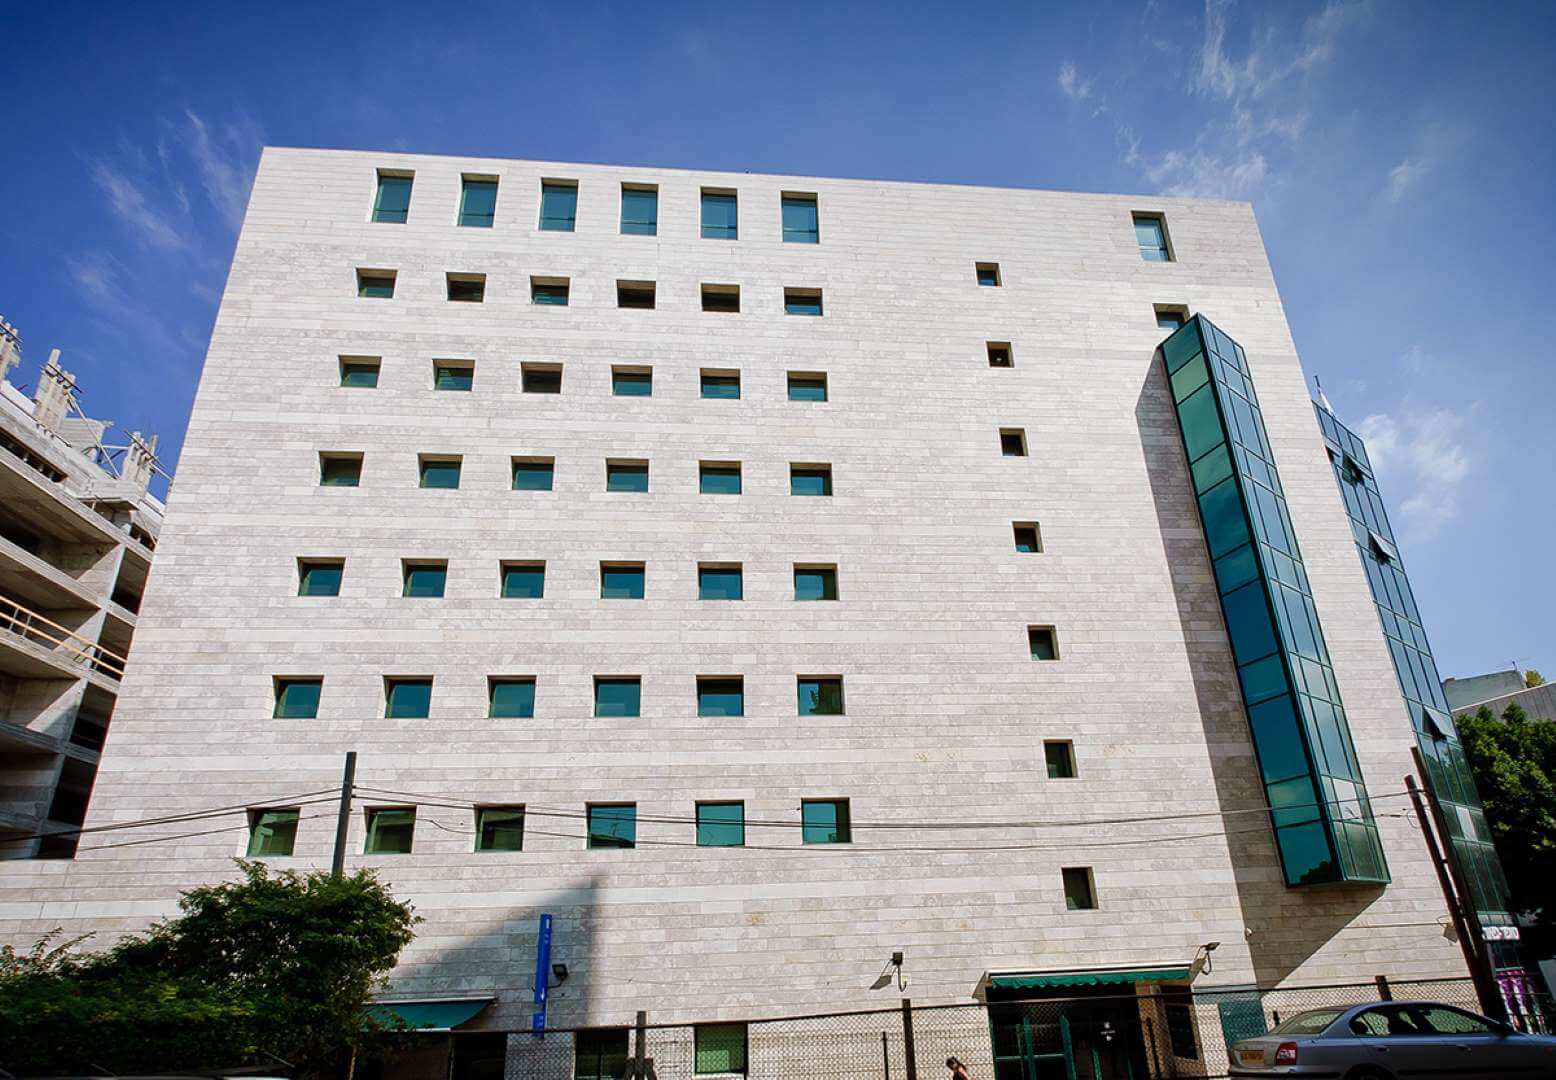 Photograph of an office building in the Beit America Israel project in Petah Tiqva